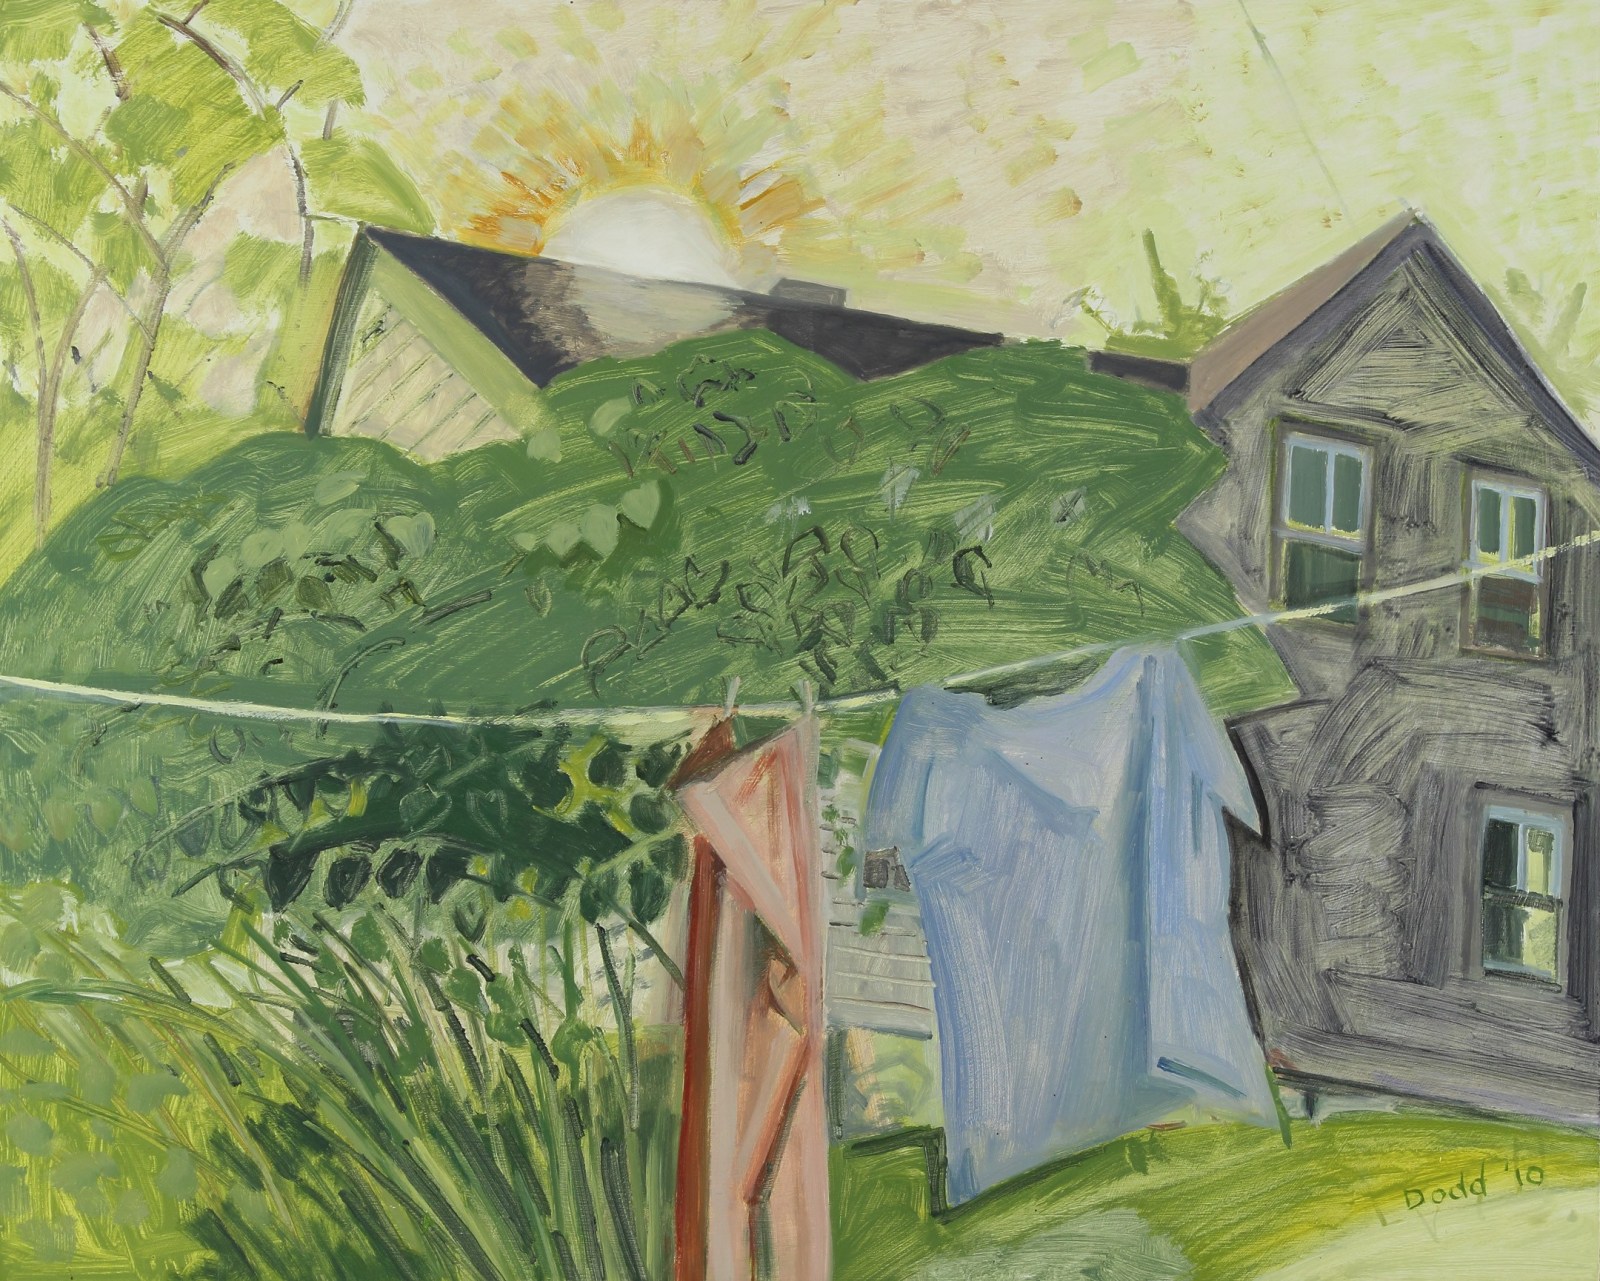 Lois Dodd - New Panel Paintings - Exhibitions - Alexandre Gallery